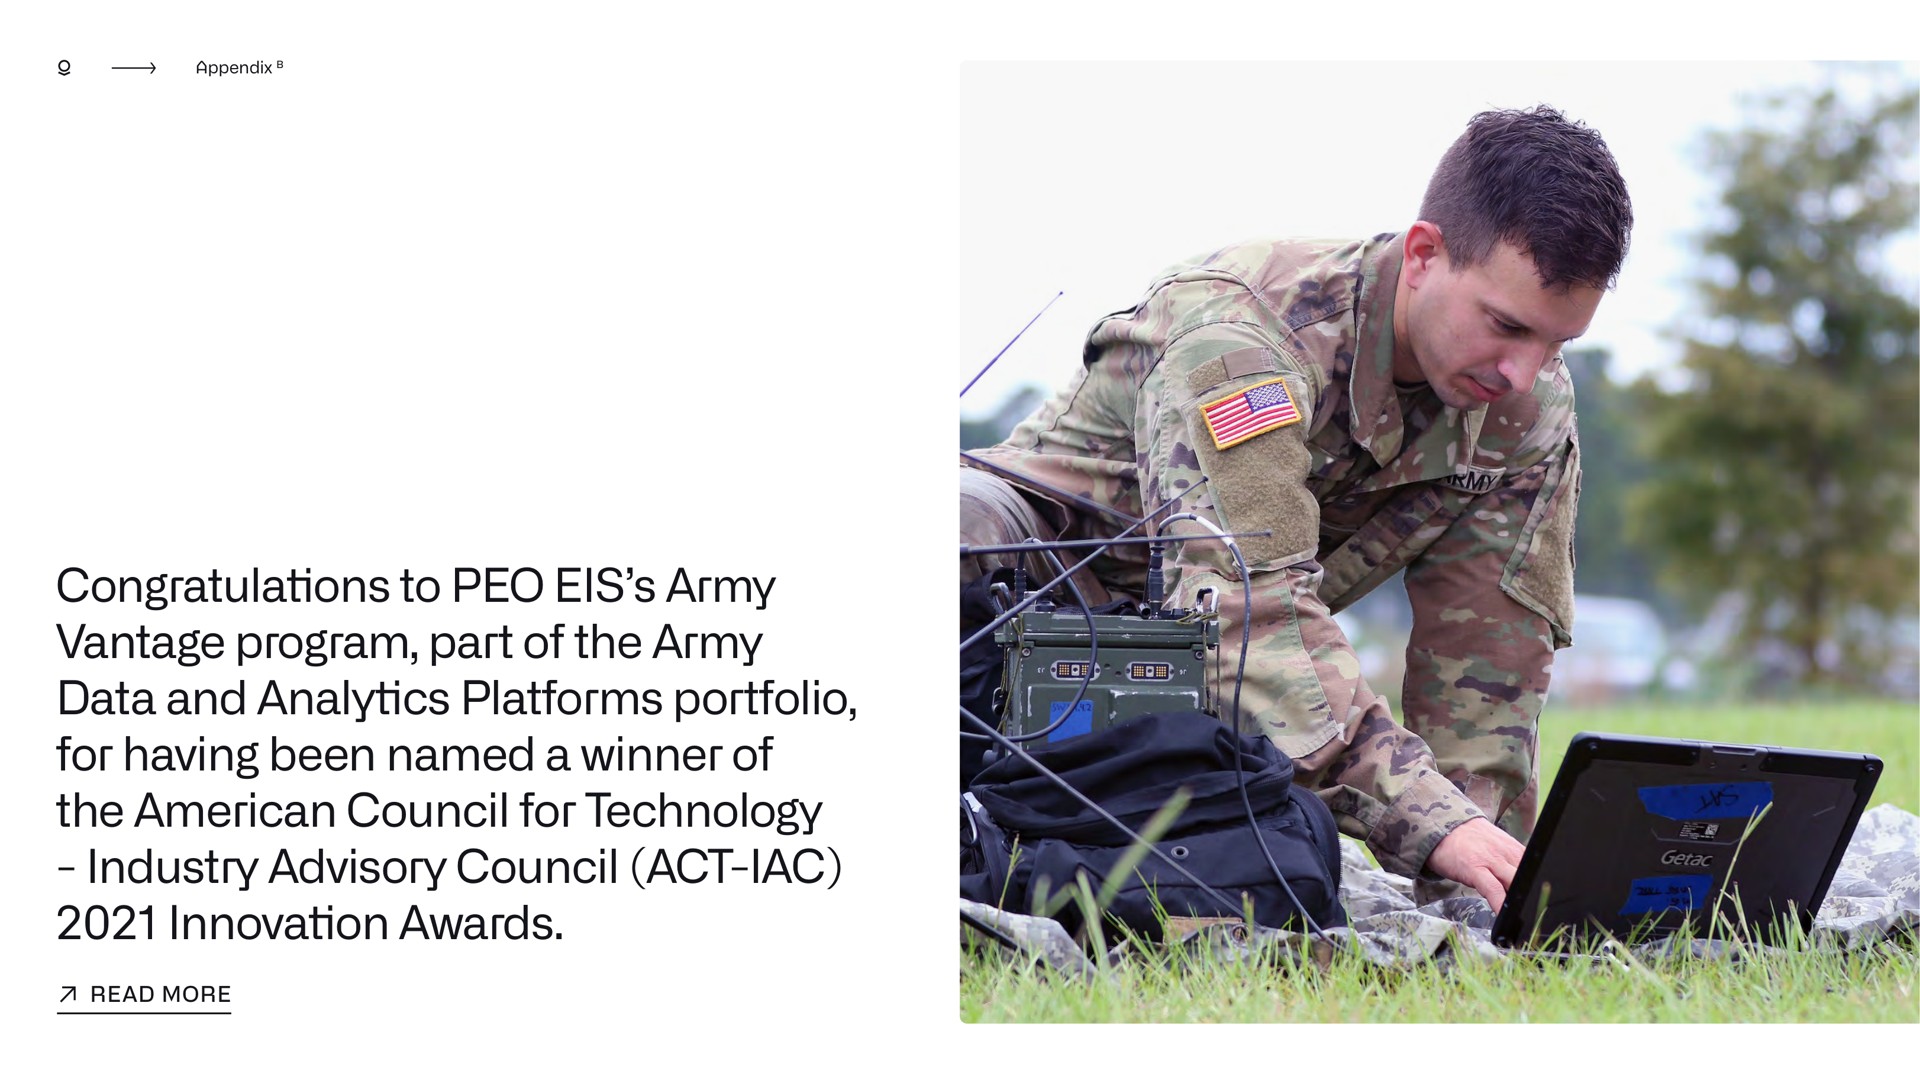 congratulations to army vantage program part of the army data and analytics platforms portfolio for having been named a winner of the council for technology industry advisory council act innovation awards | Palantir